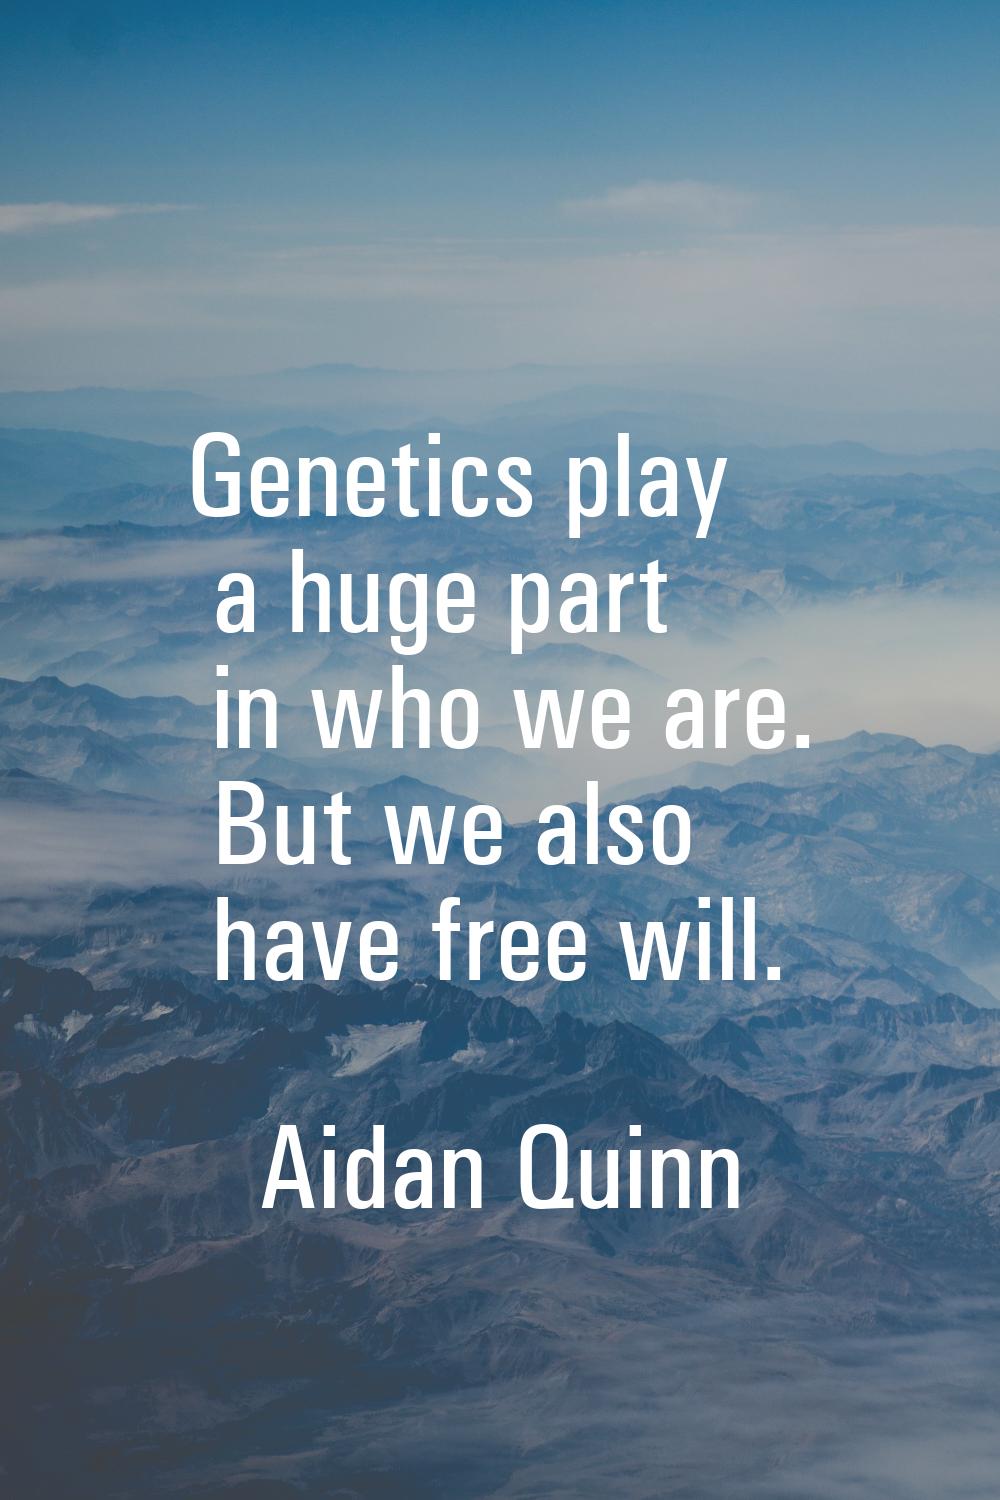 Genetics play a huge part in who we are. But we also have free will.